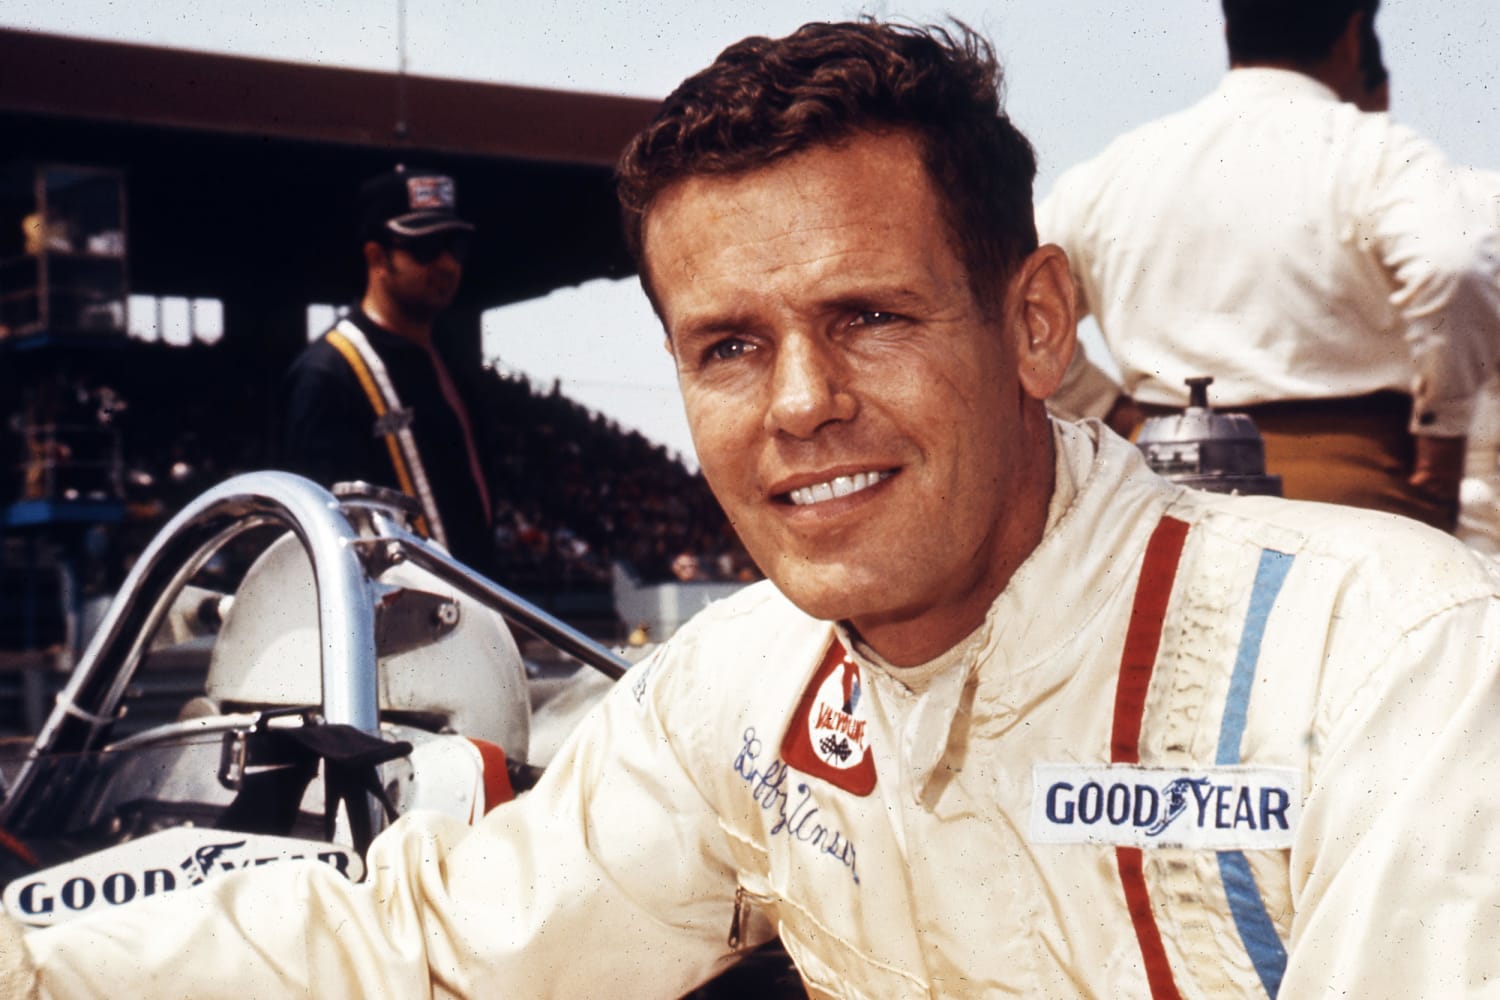 Bobby Unser, Indy 500 champ from famed racing family, dies at 87